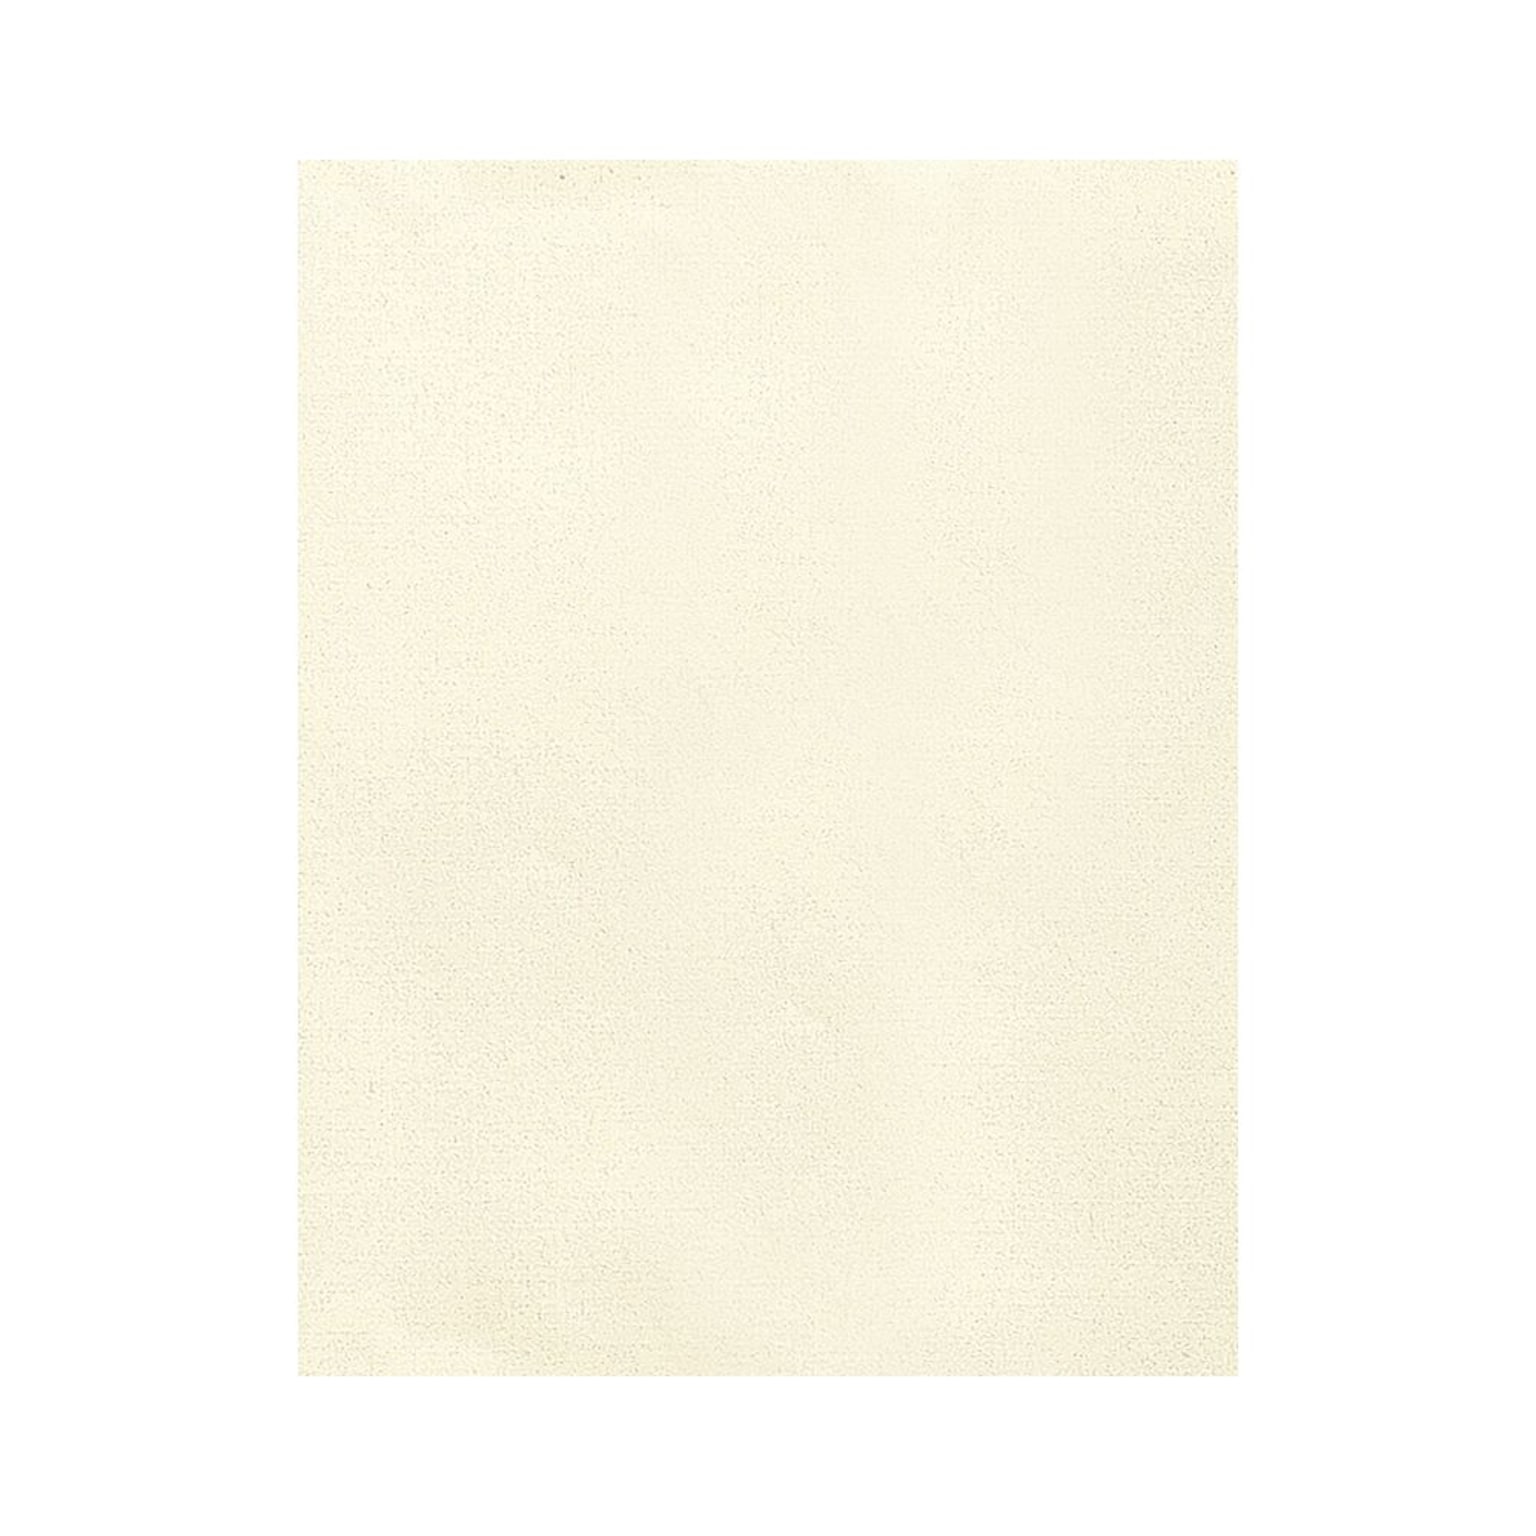 Lux Cardstock 8.5 x 11 inch Natural Linen 50/Pack